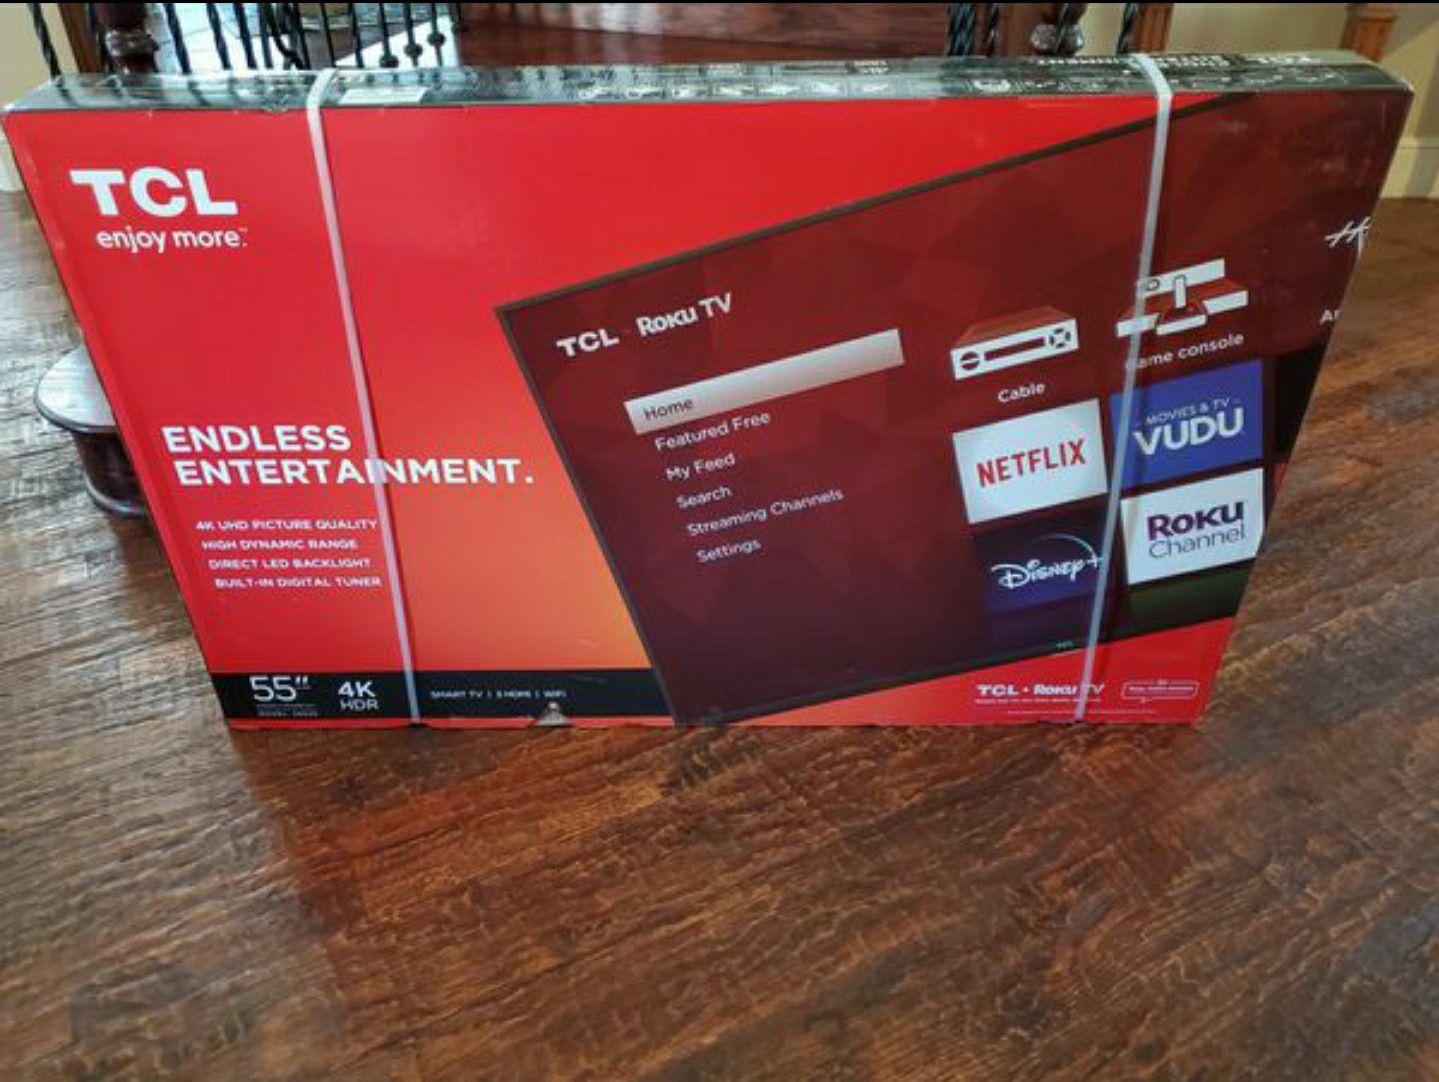 55 inch 4k ultra smart led hdtv built in Roku...new in box and sealed